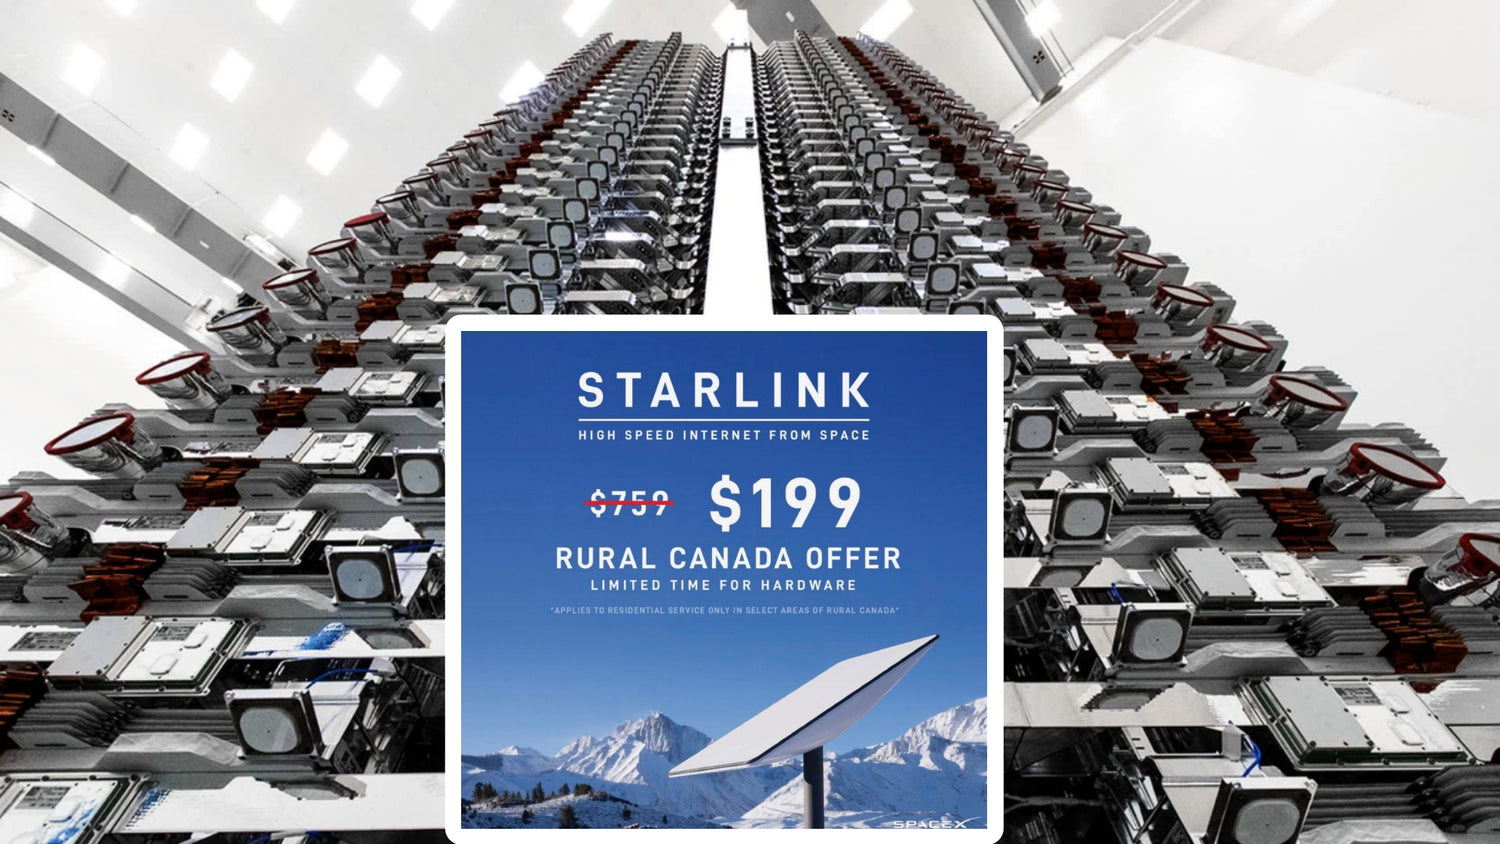 SpaceX is offering a 73% discount on Starlink hardware for rural Canada customers